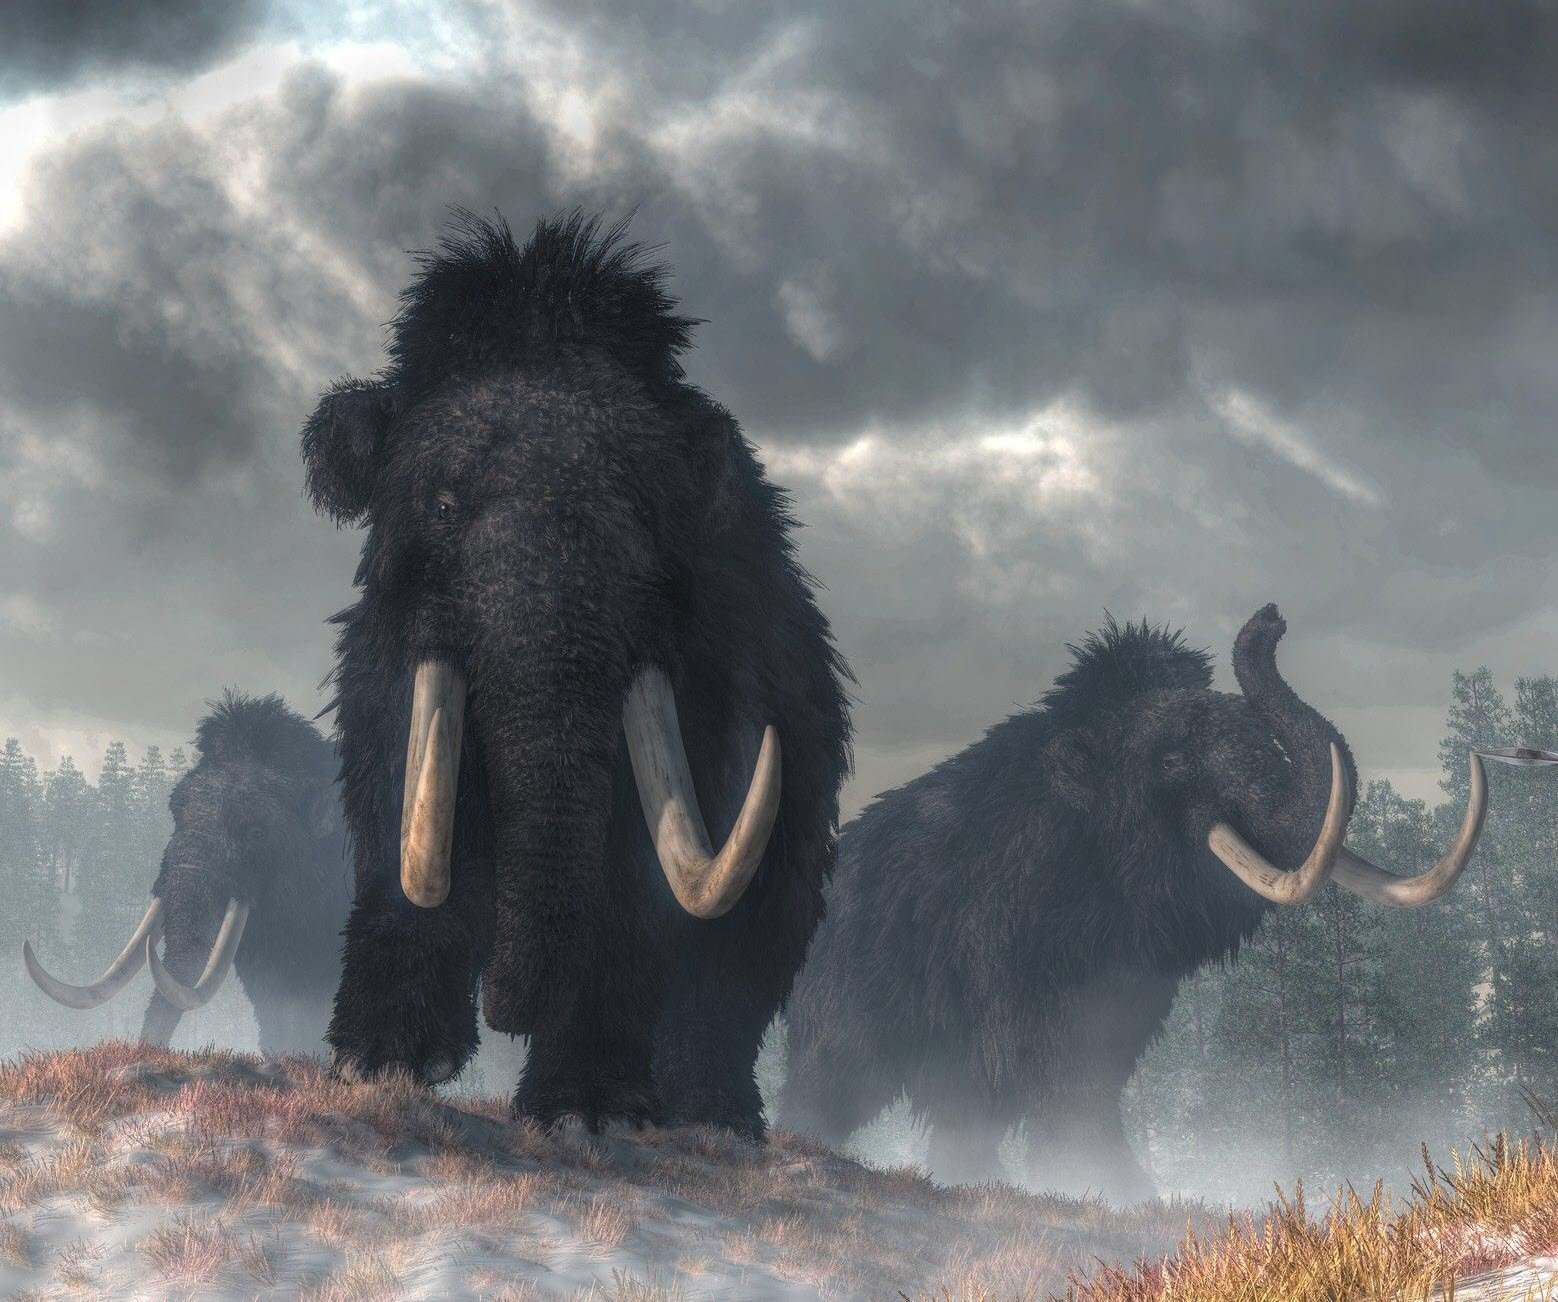 Finding The Cause of Mammoth Extinction